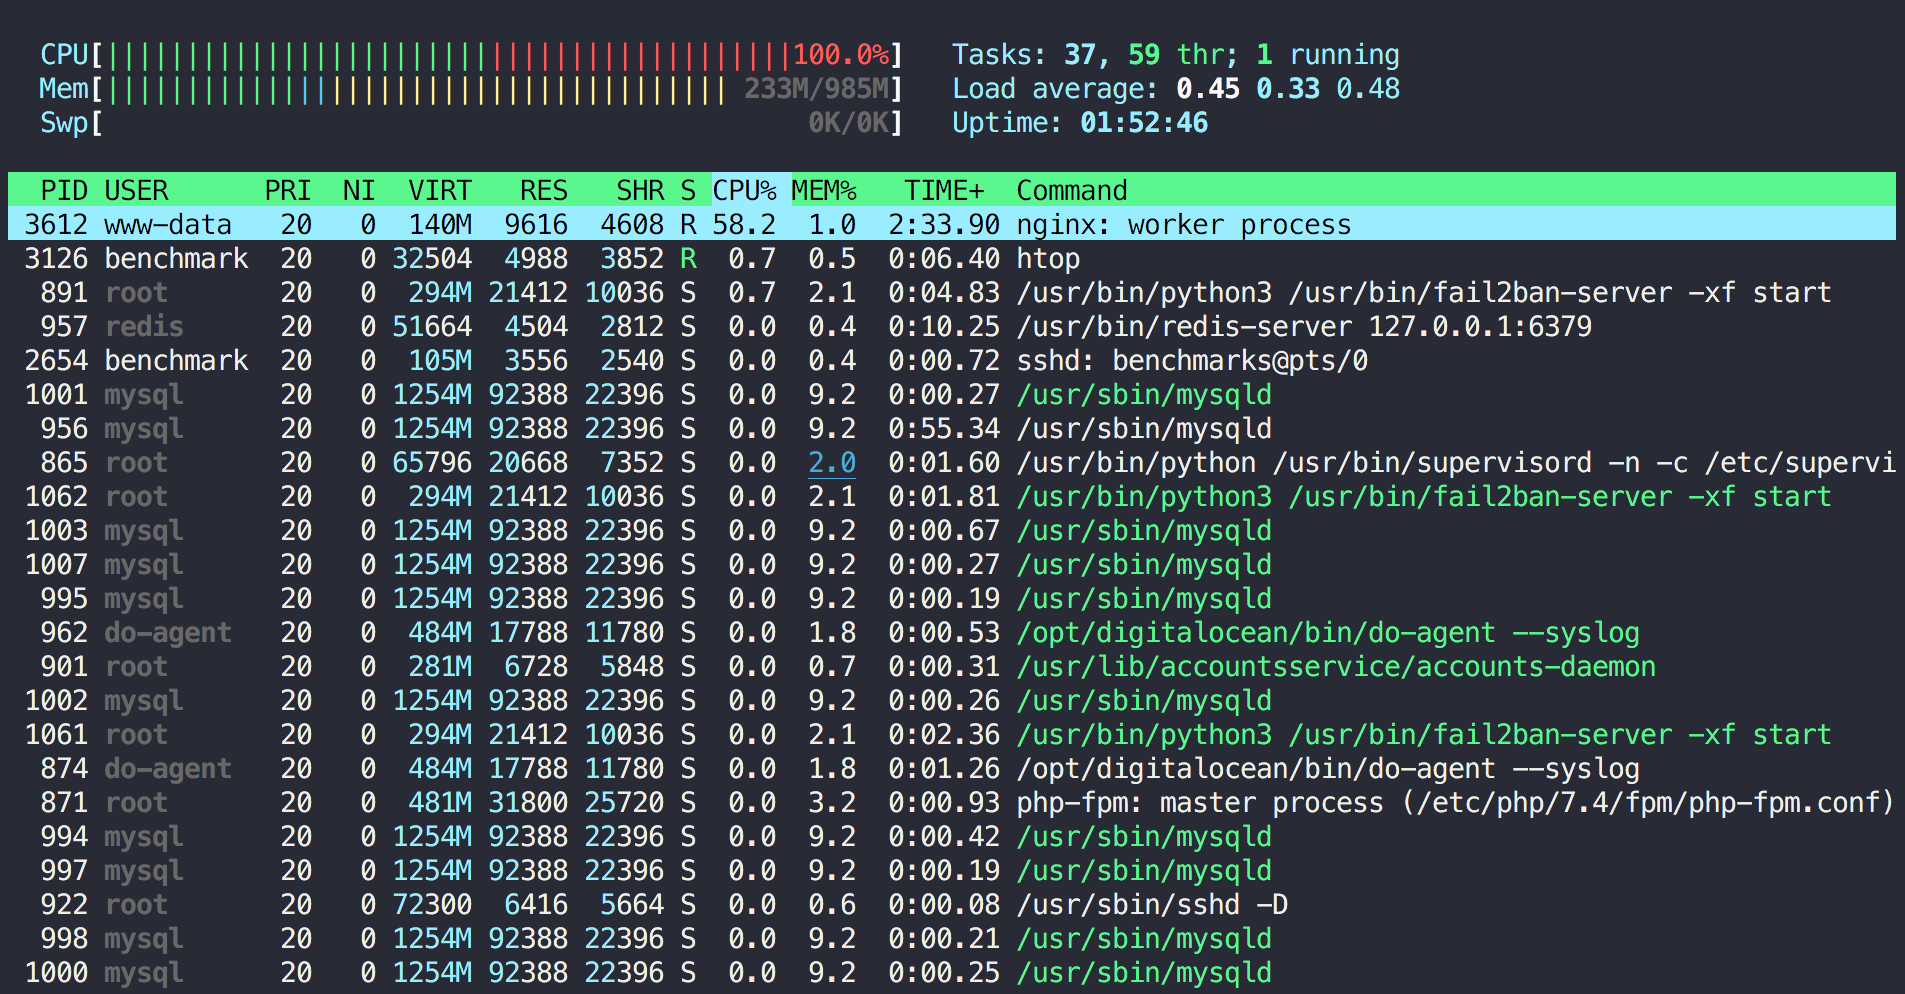 Final htop results